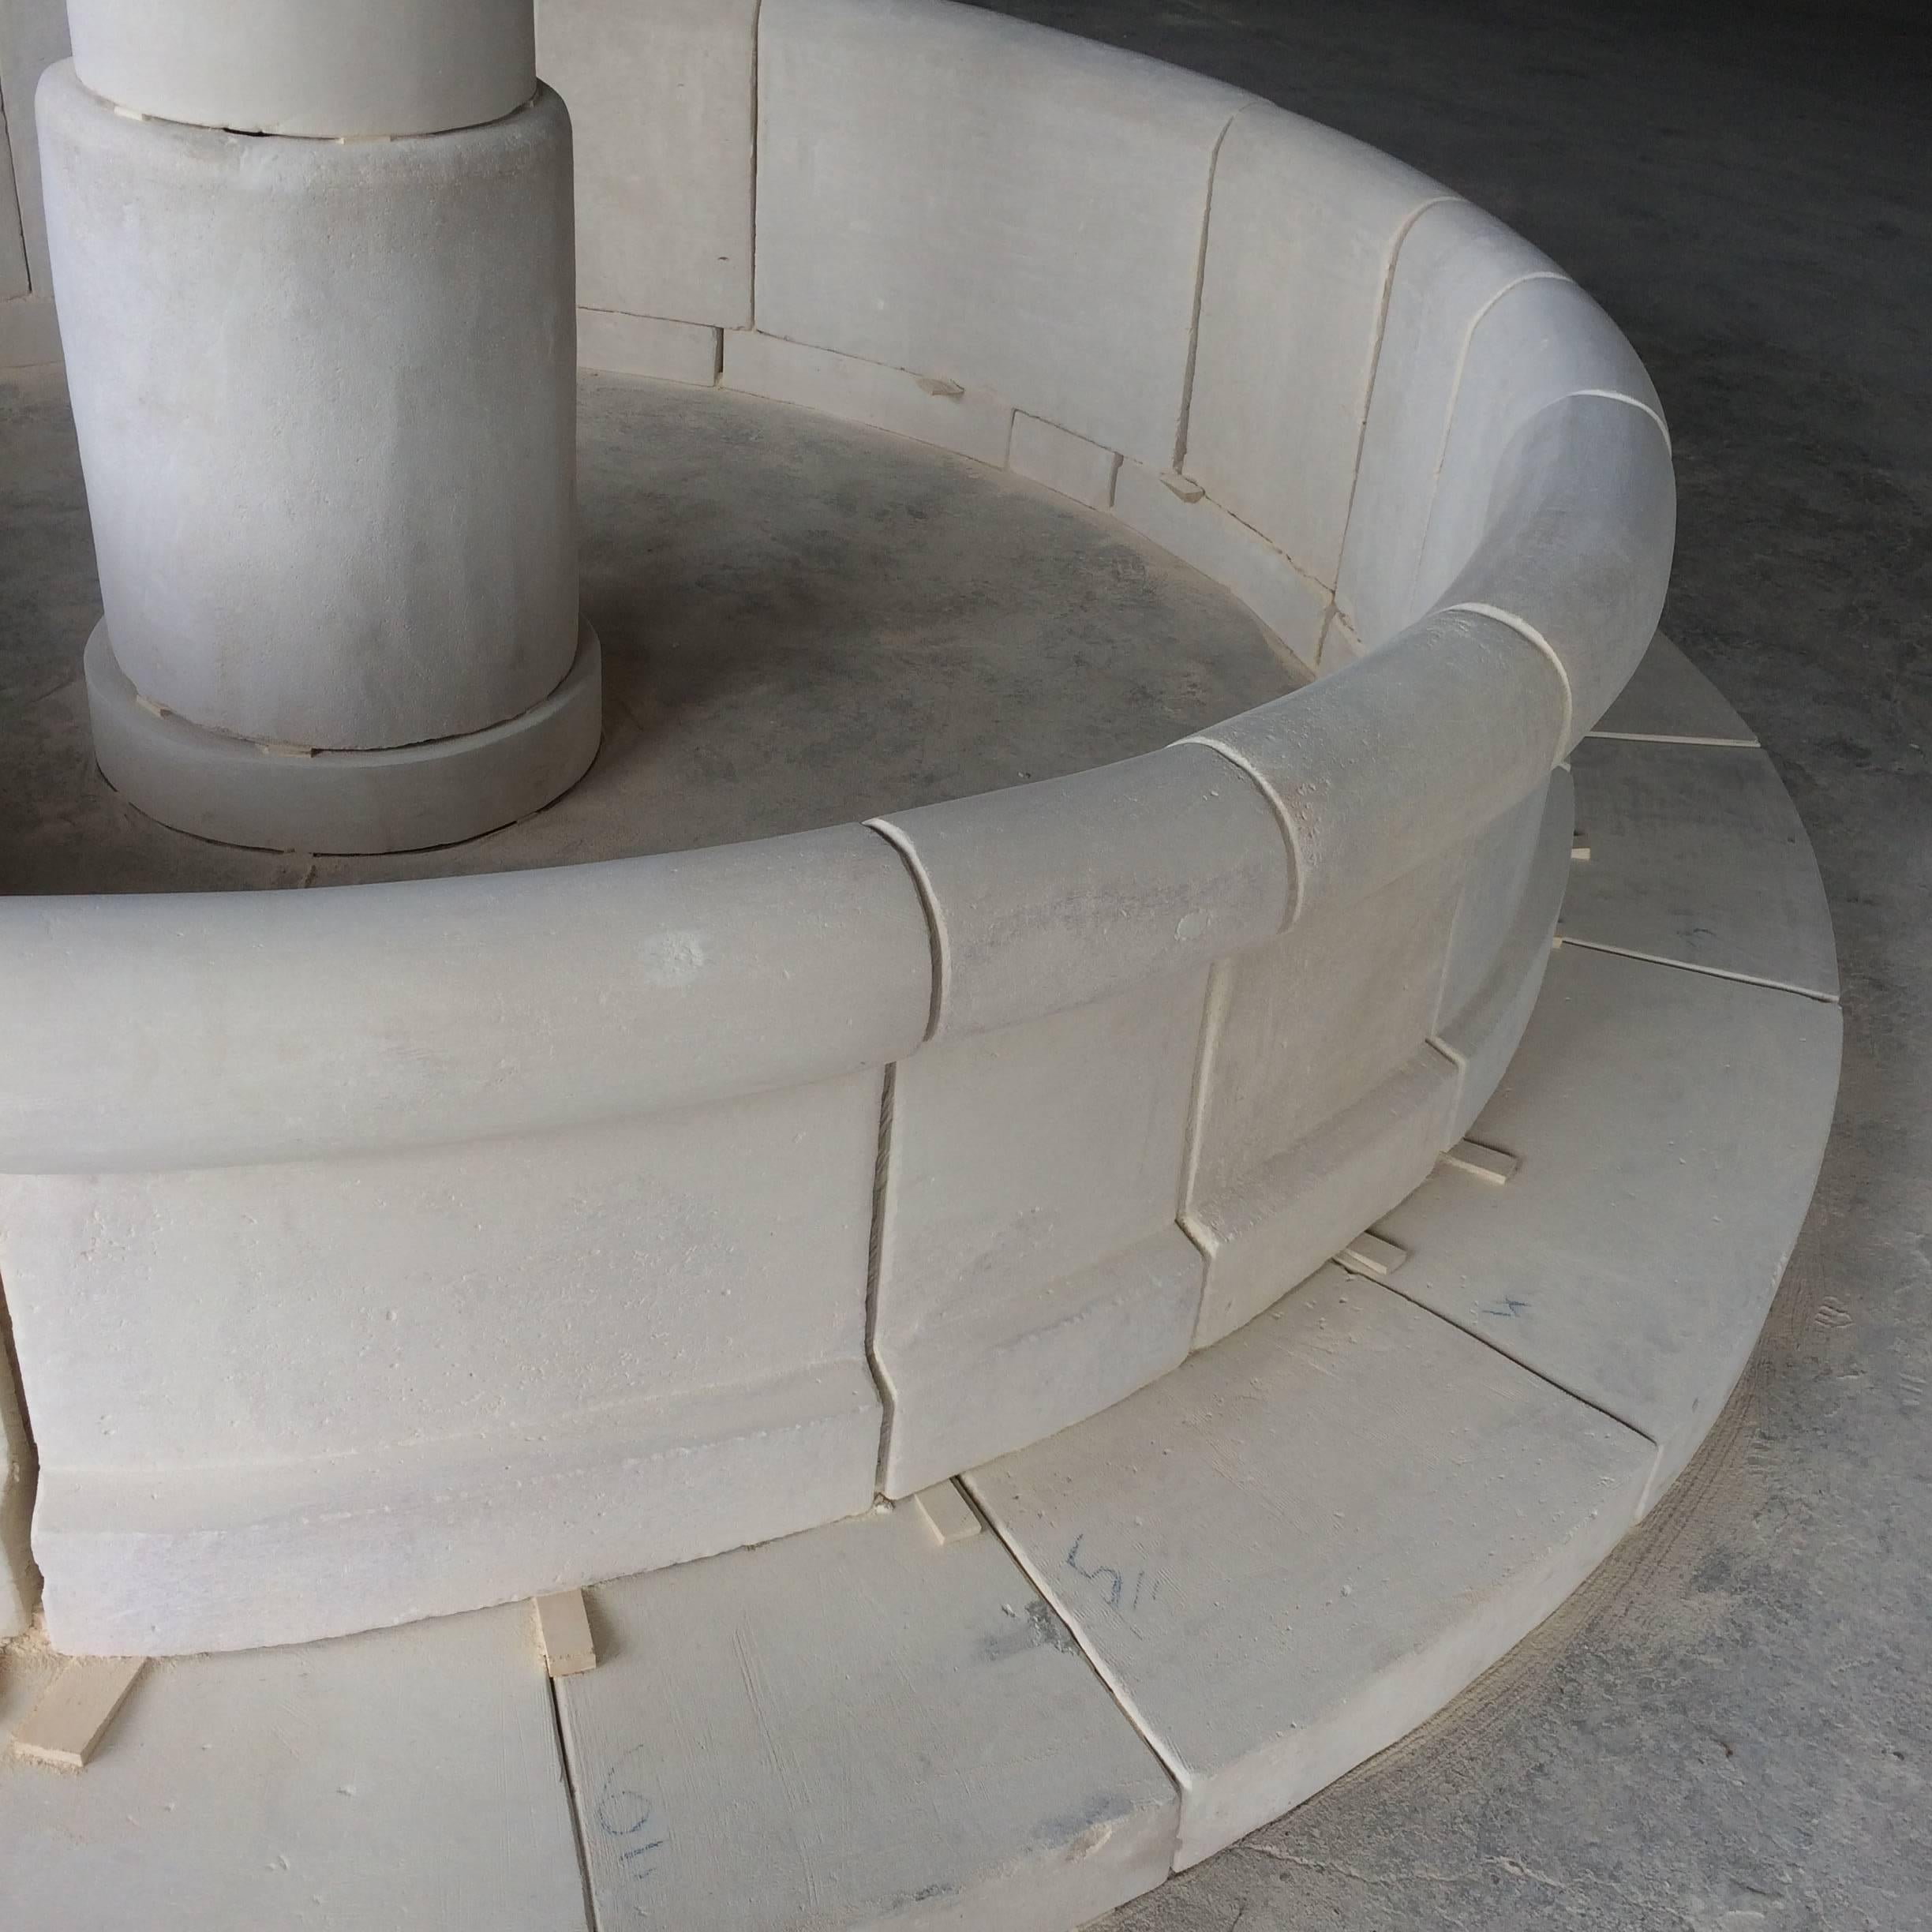 A large and massive French Louis XIV style round fountain in pure French limestone, handcrafted as the old French tradition, piece by piece from old blocks of French limestone. 21st Century, France.

Handfinish, very massive and solid limestone from